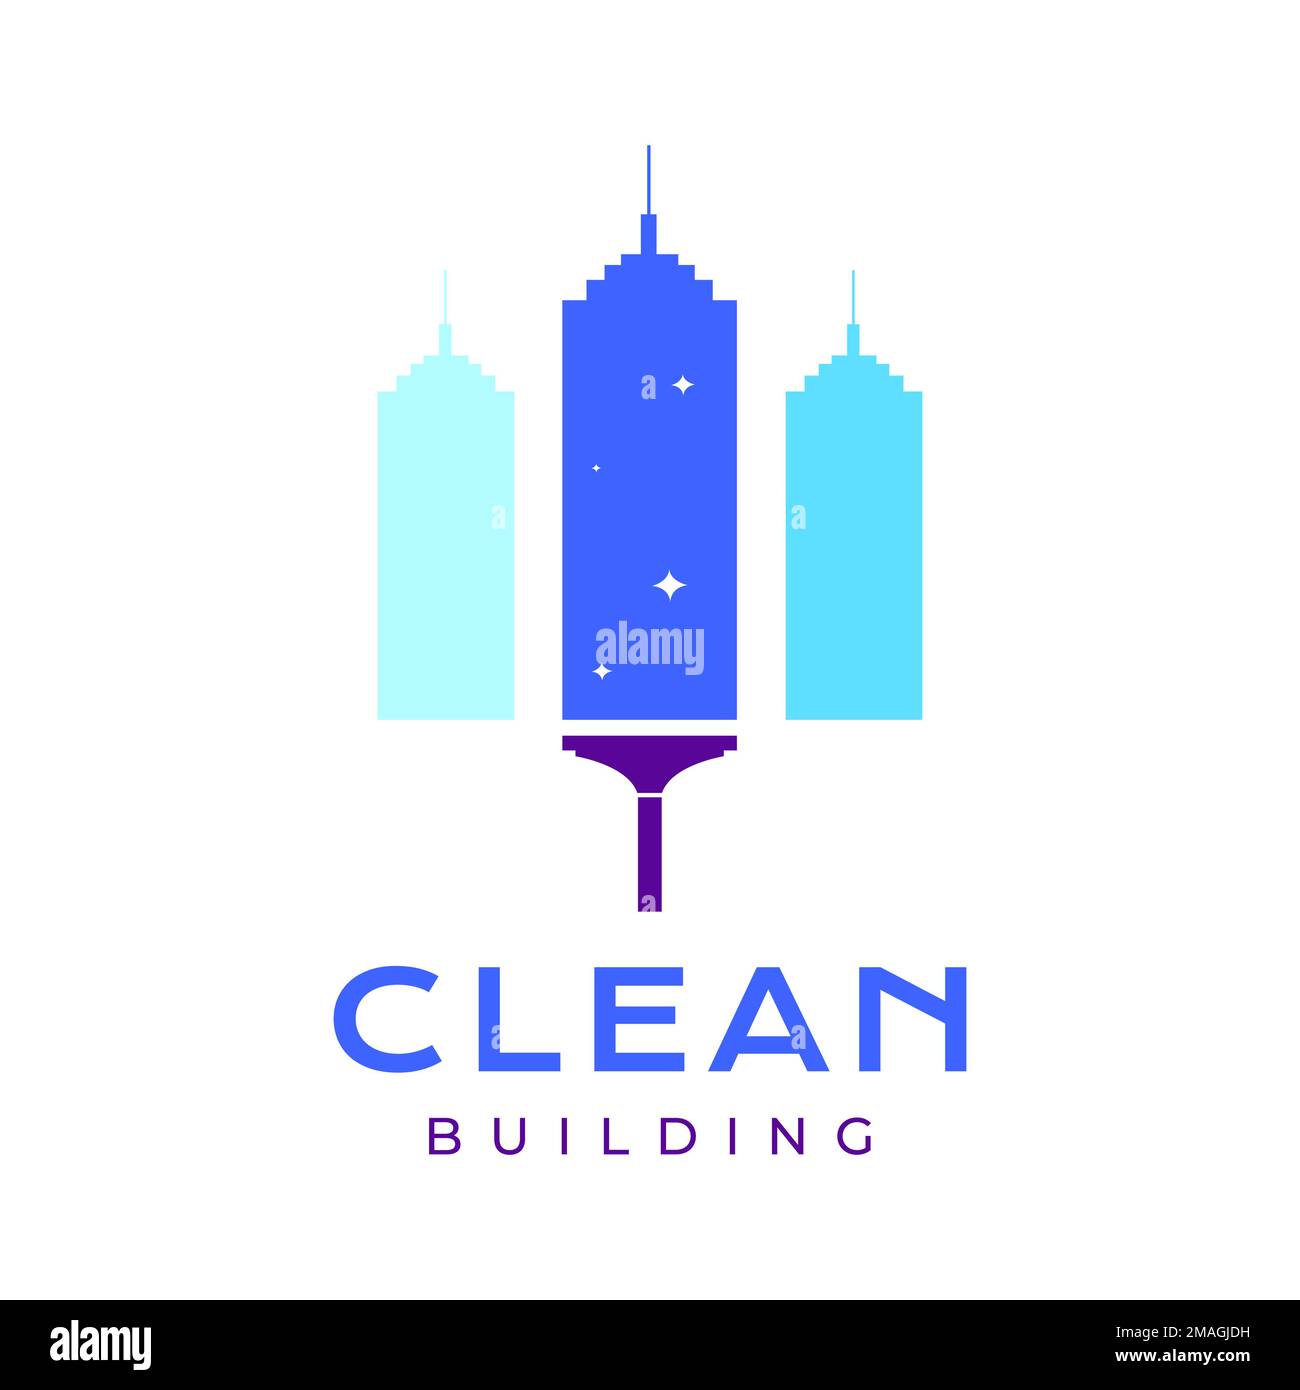 cleaning building city skyscraper colorful abstract modern logo design vector icon illustration template Stock Vector